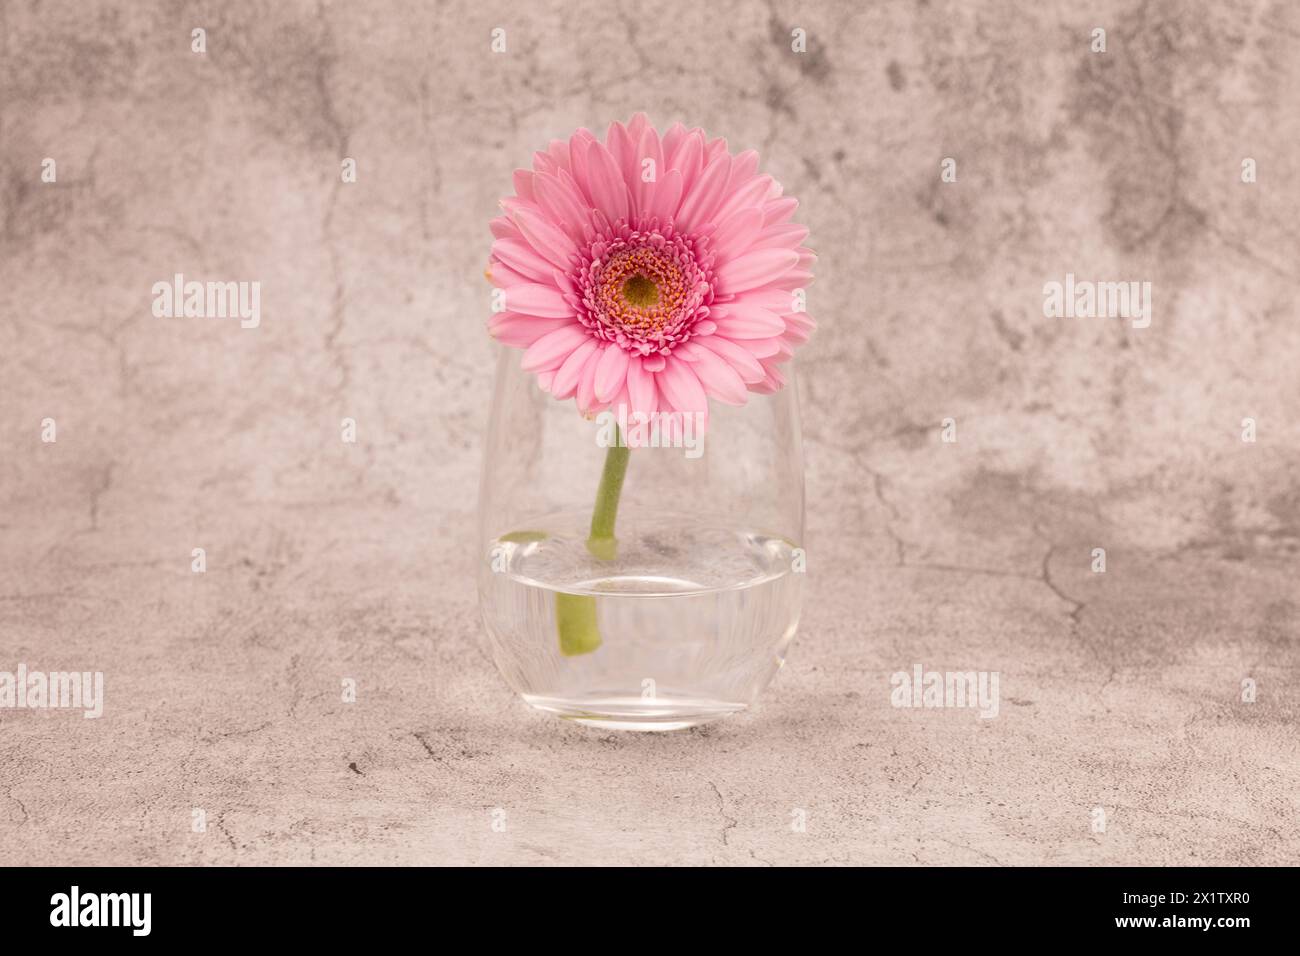 Pink Transvaal daisy in a glass centred against a white and grey chalk effect background with copy space to both right and left sides Stock Photo